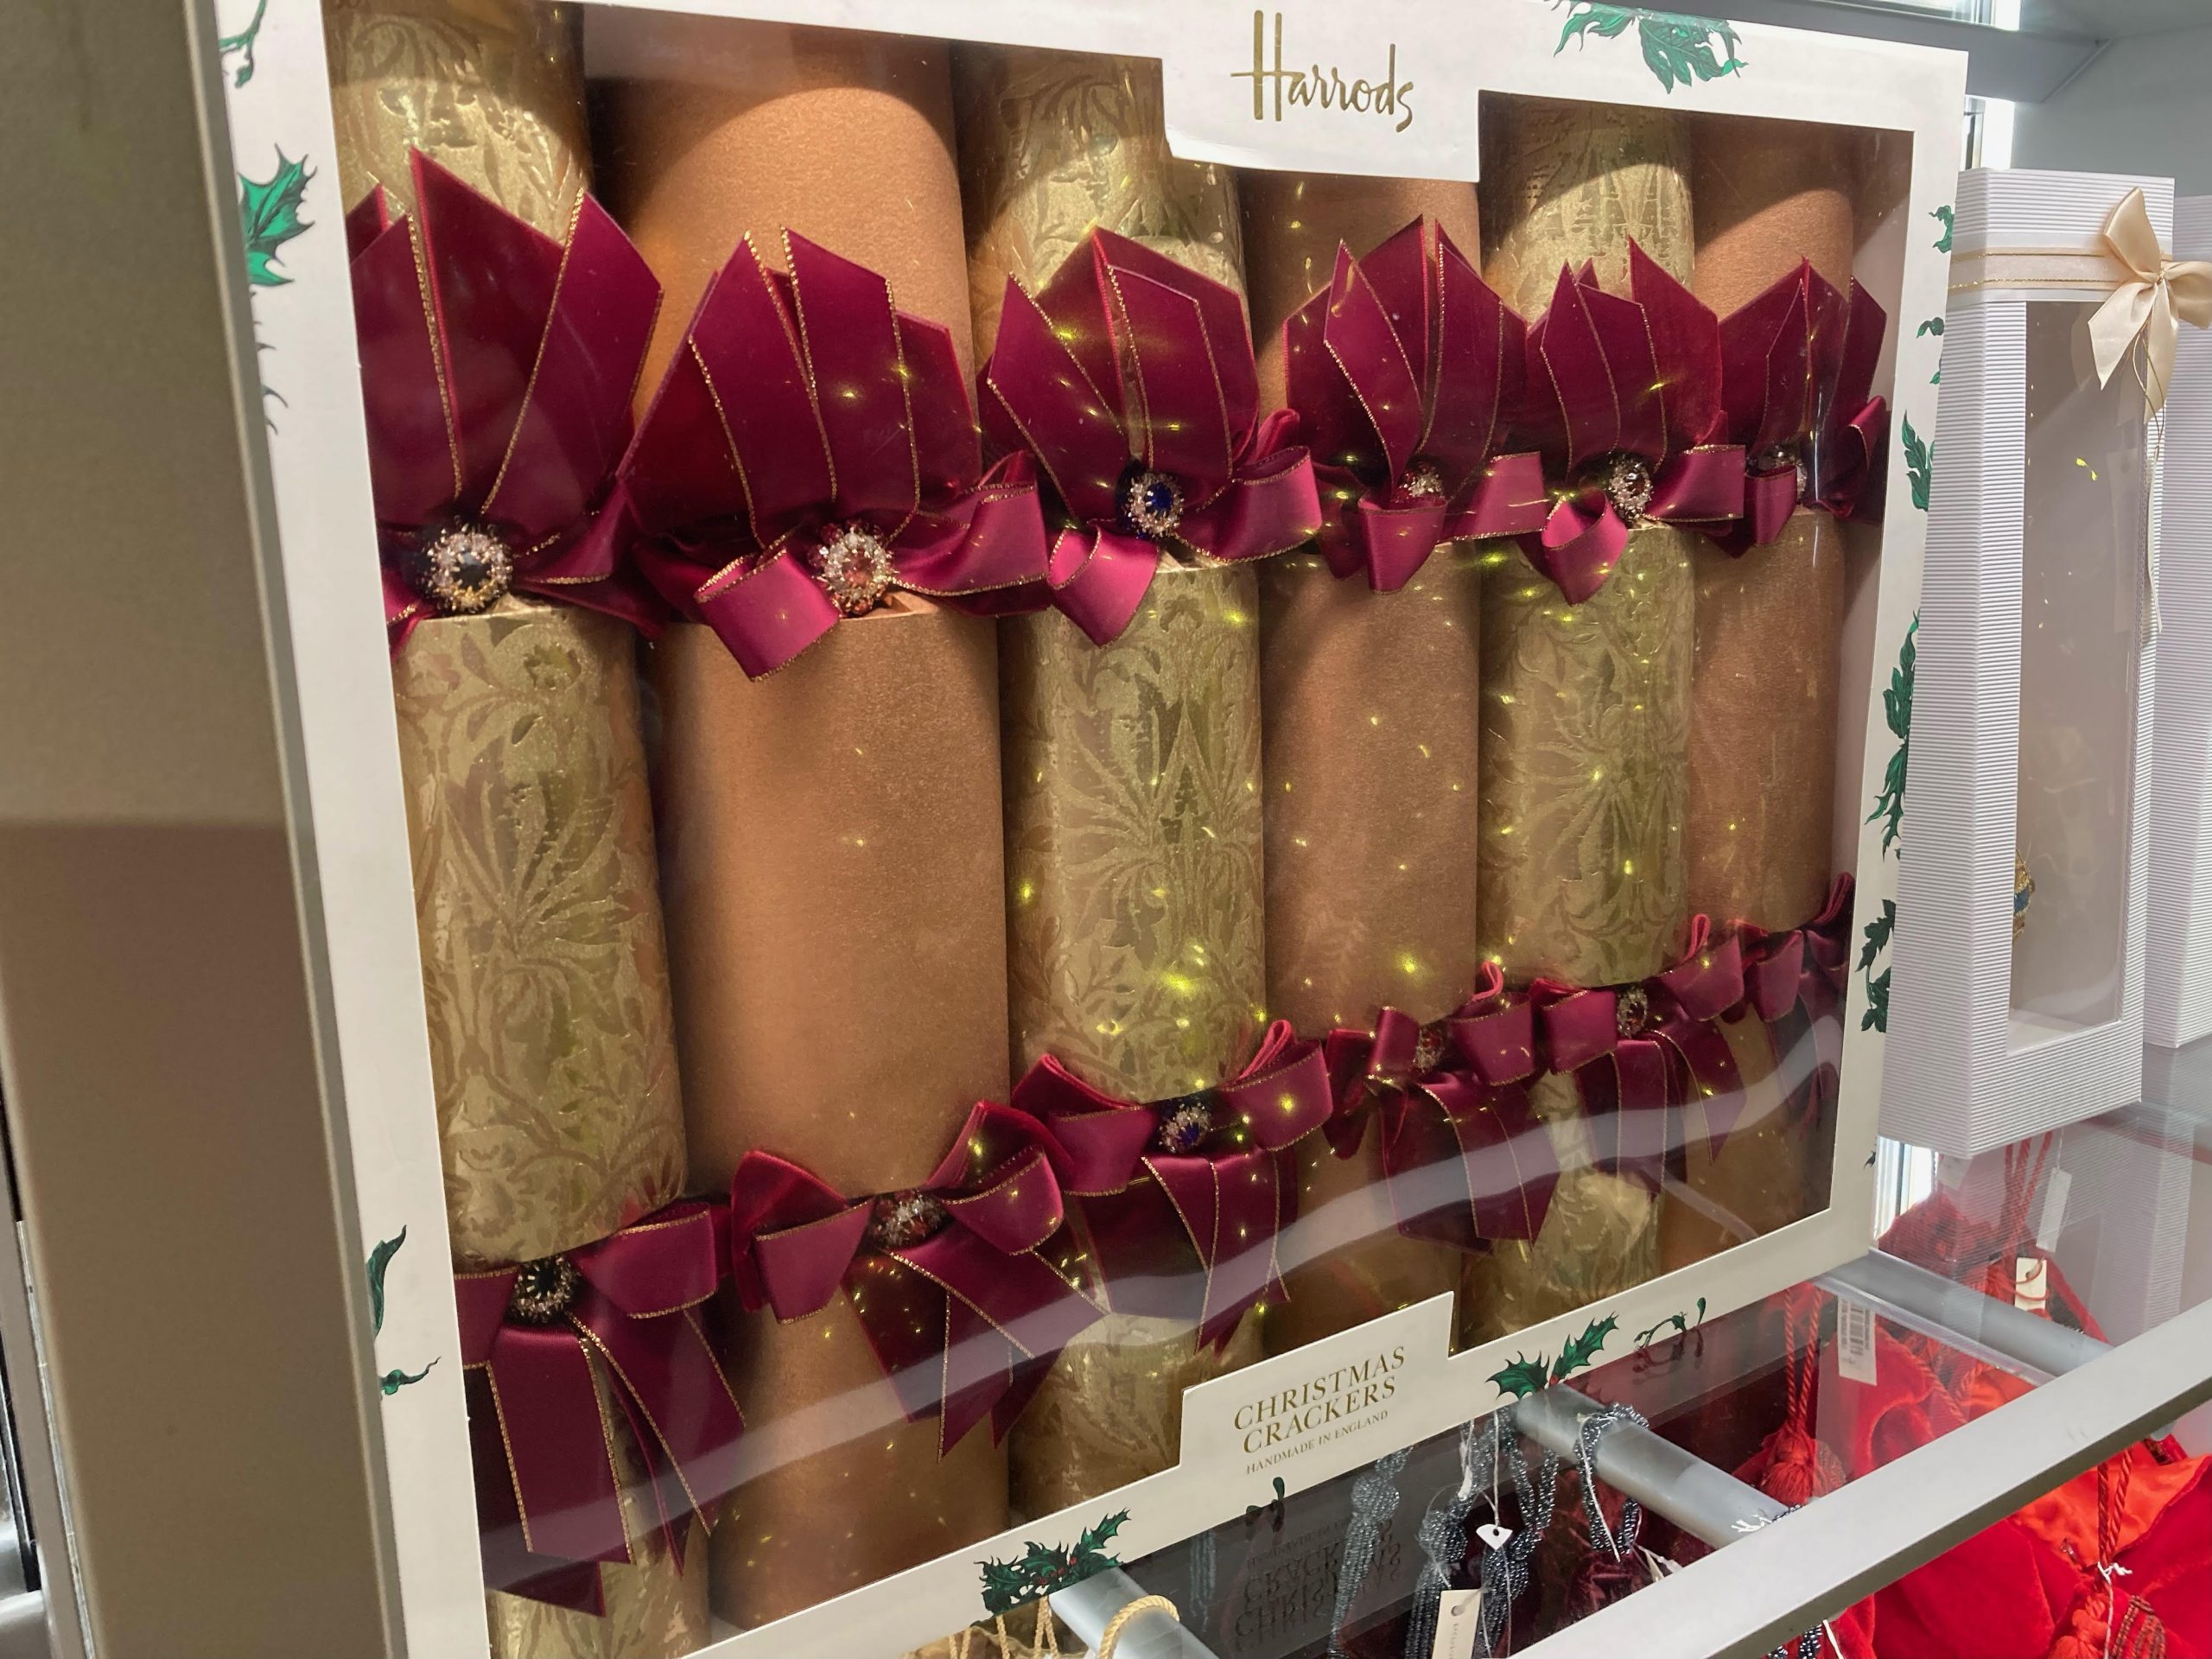 Harrods releases box of six festive crackers – and it’ll cost you an eye-watering sum